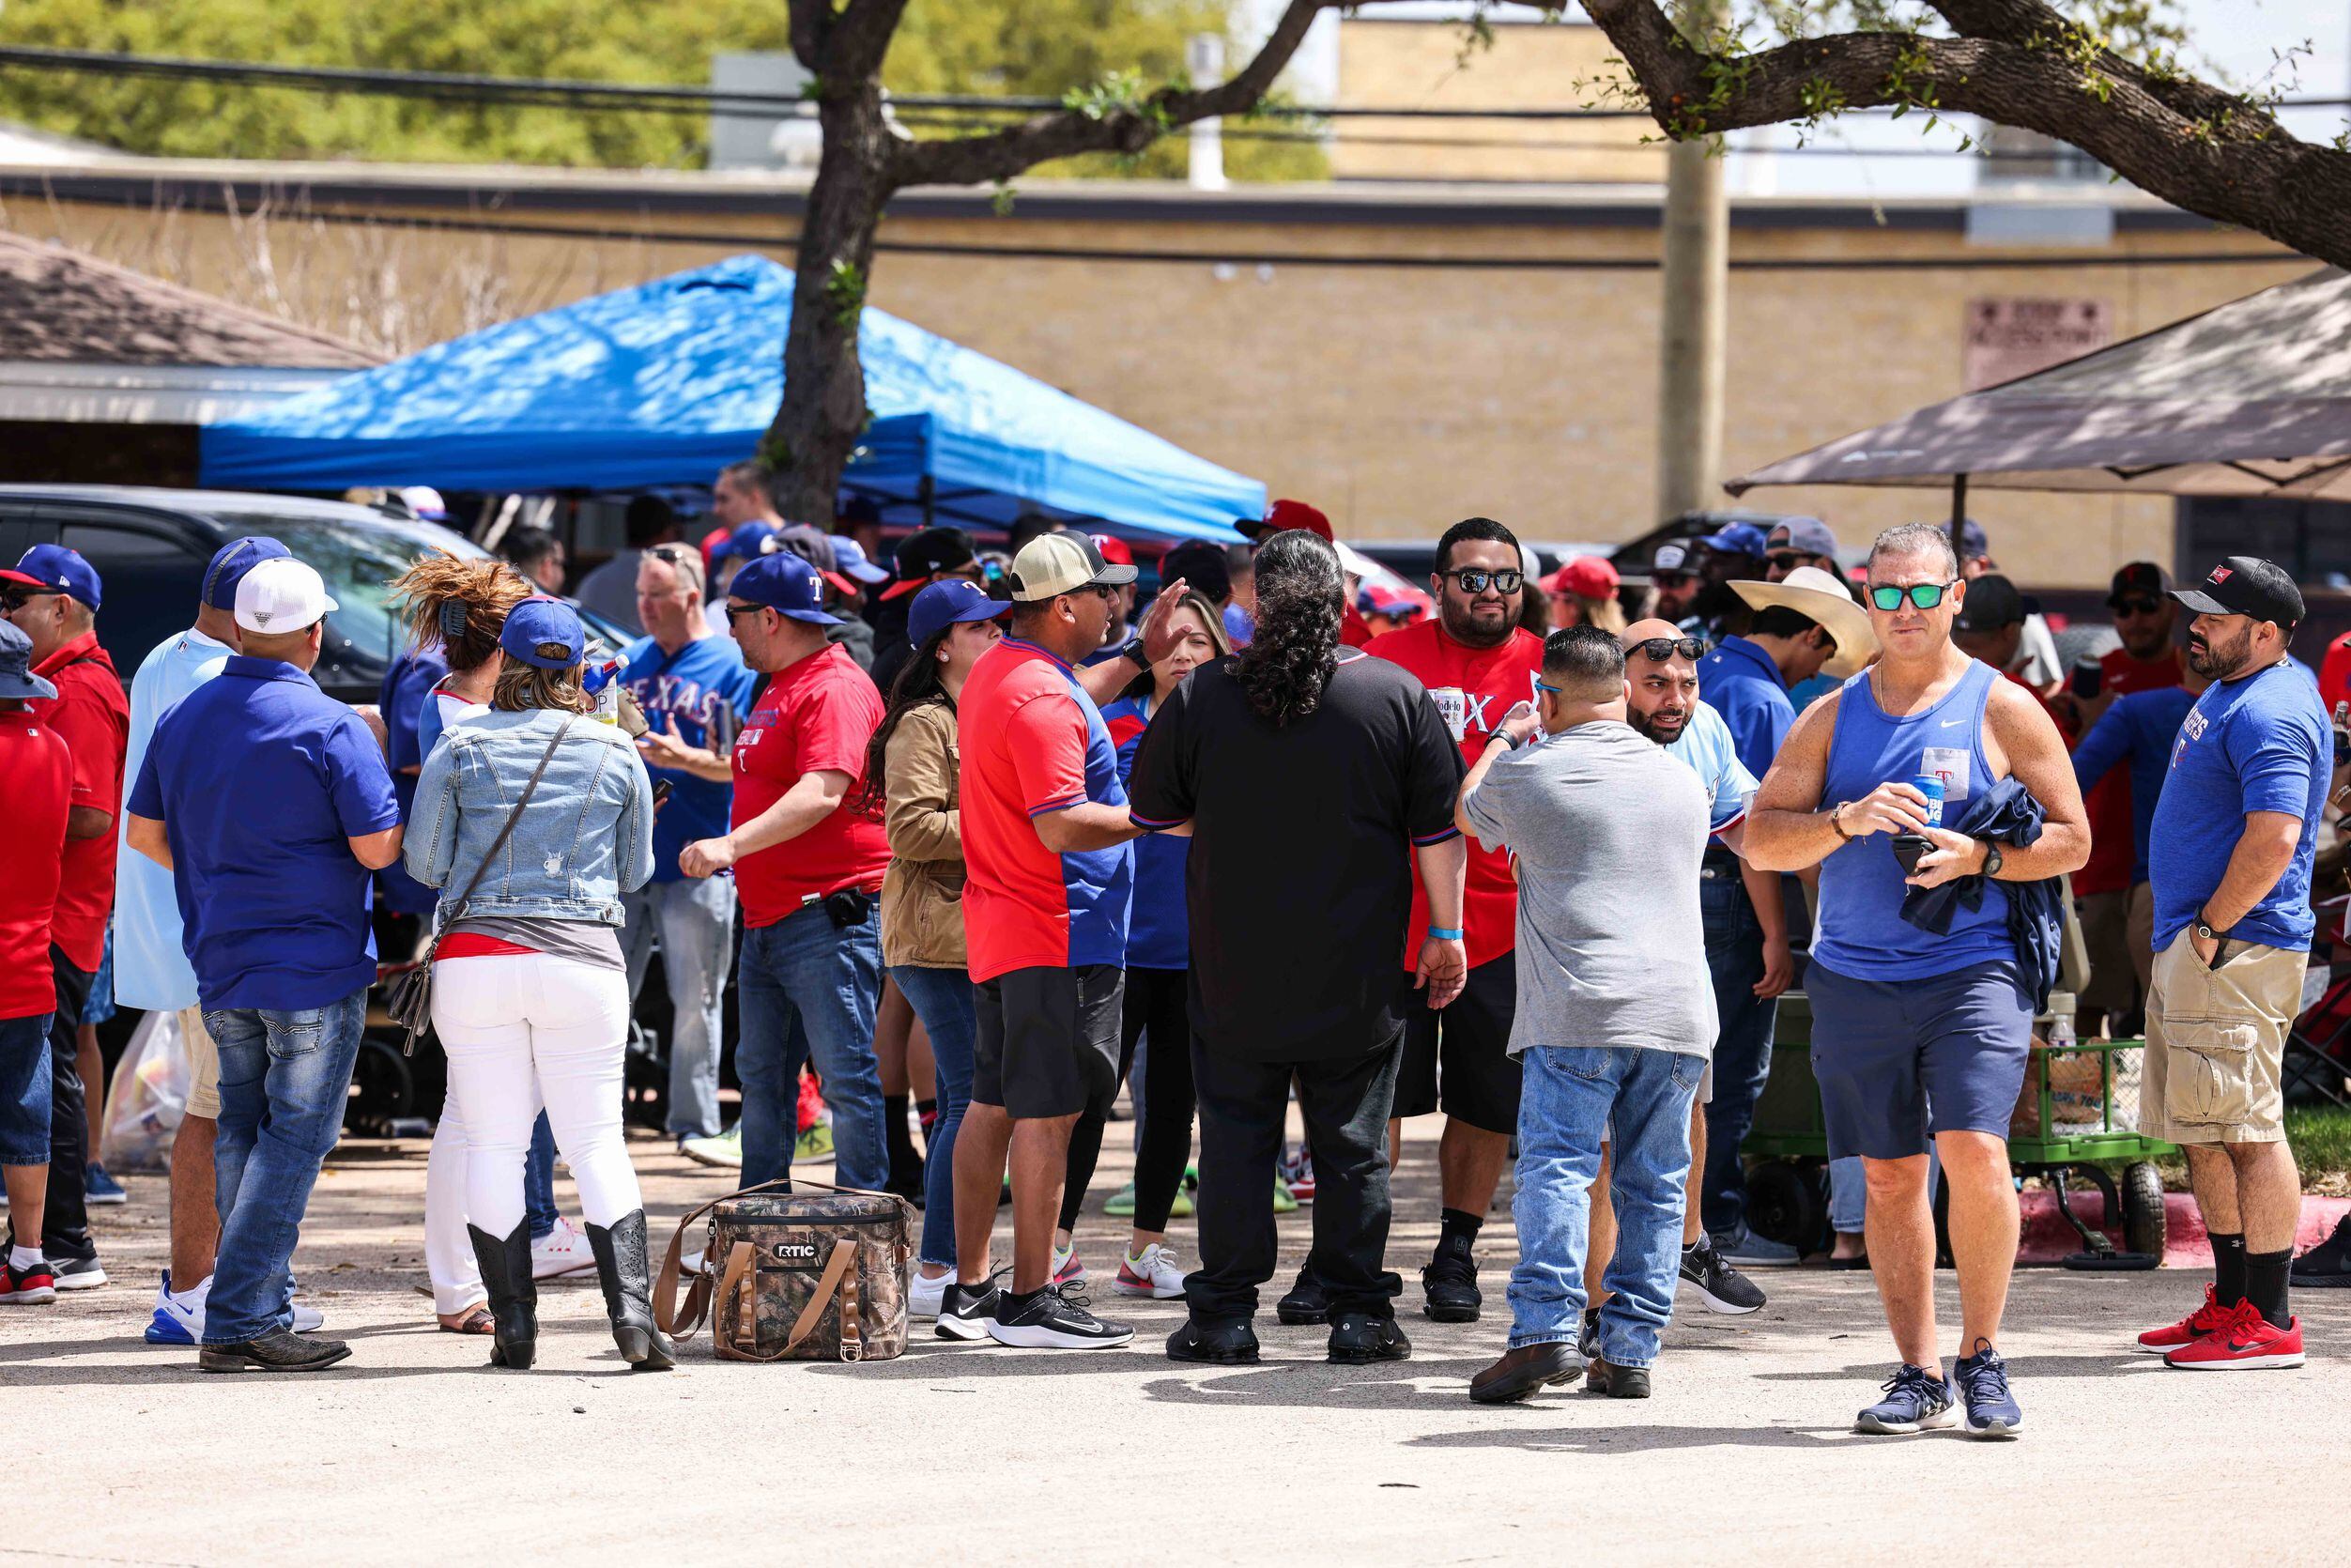 Photos Texas Rangers Fans Pack In Tight At Team S New Ballpark For Its